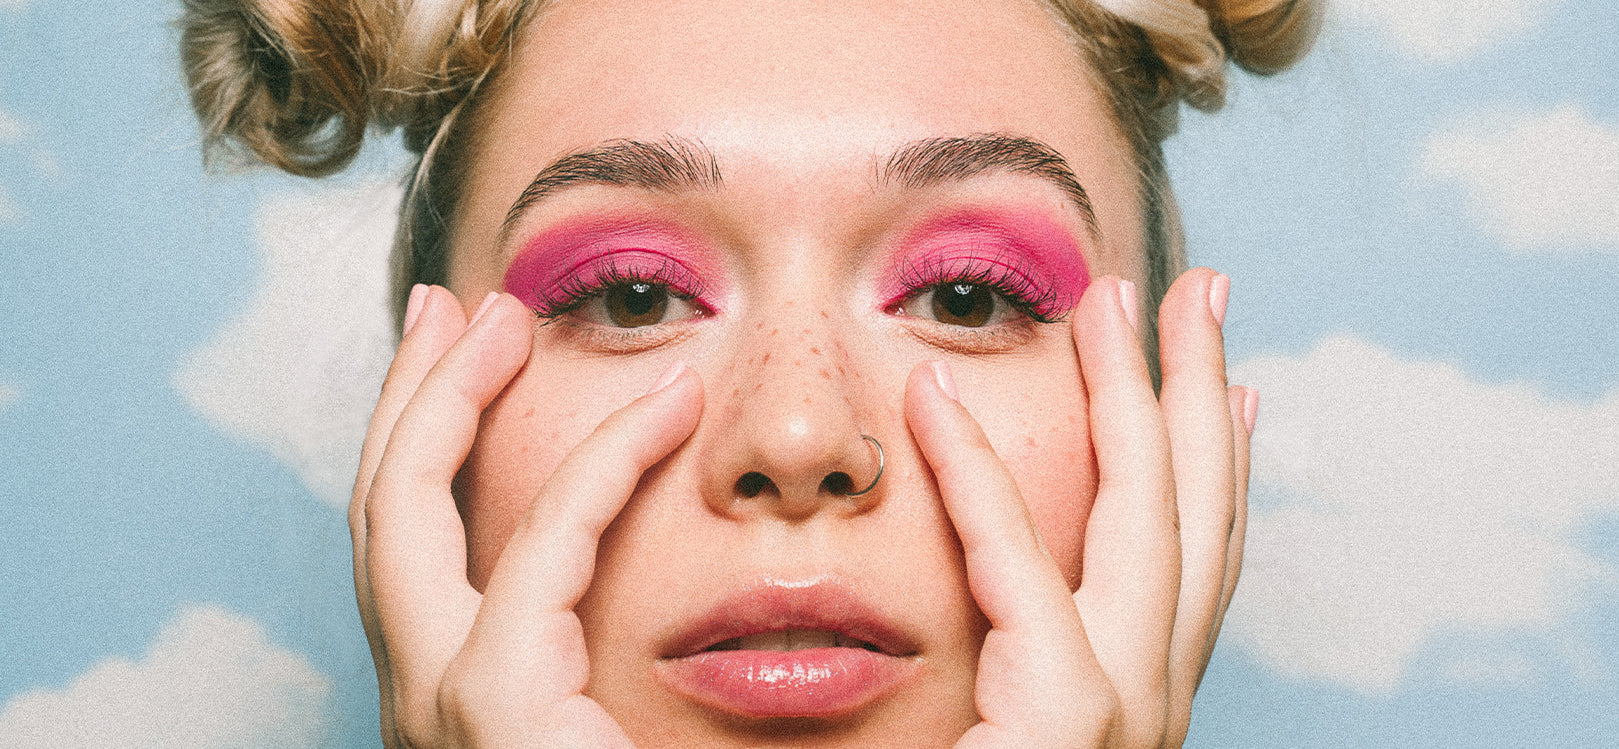 Close up of woman's face with hair in two buns, pink eyeshadow on eyelids, and chin in hands